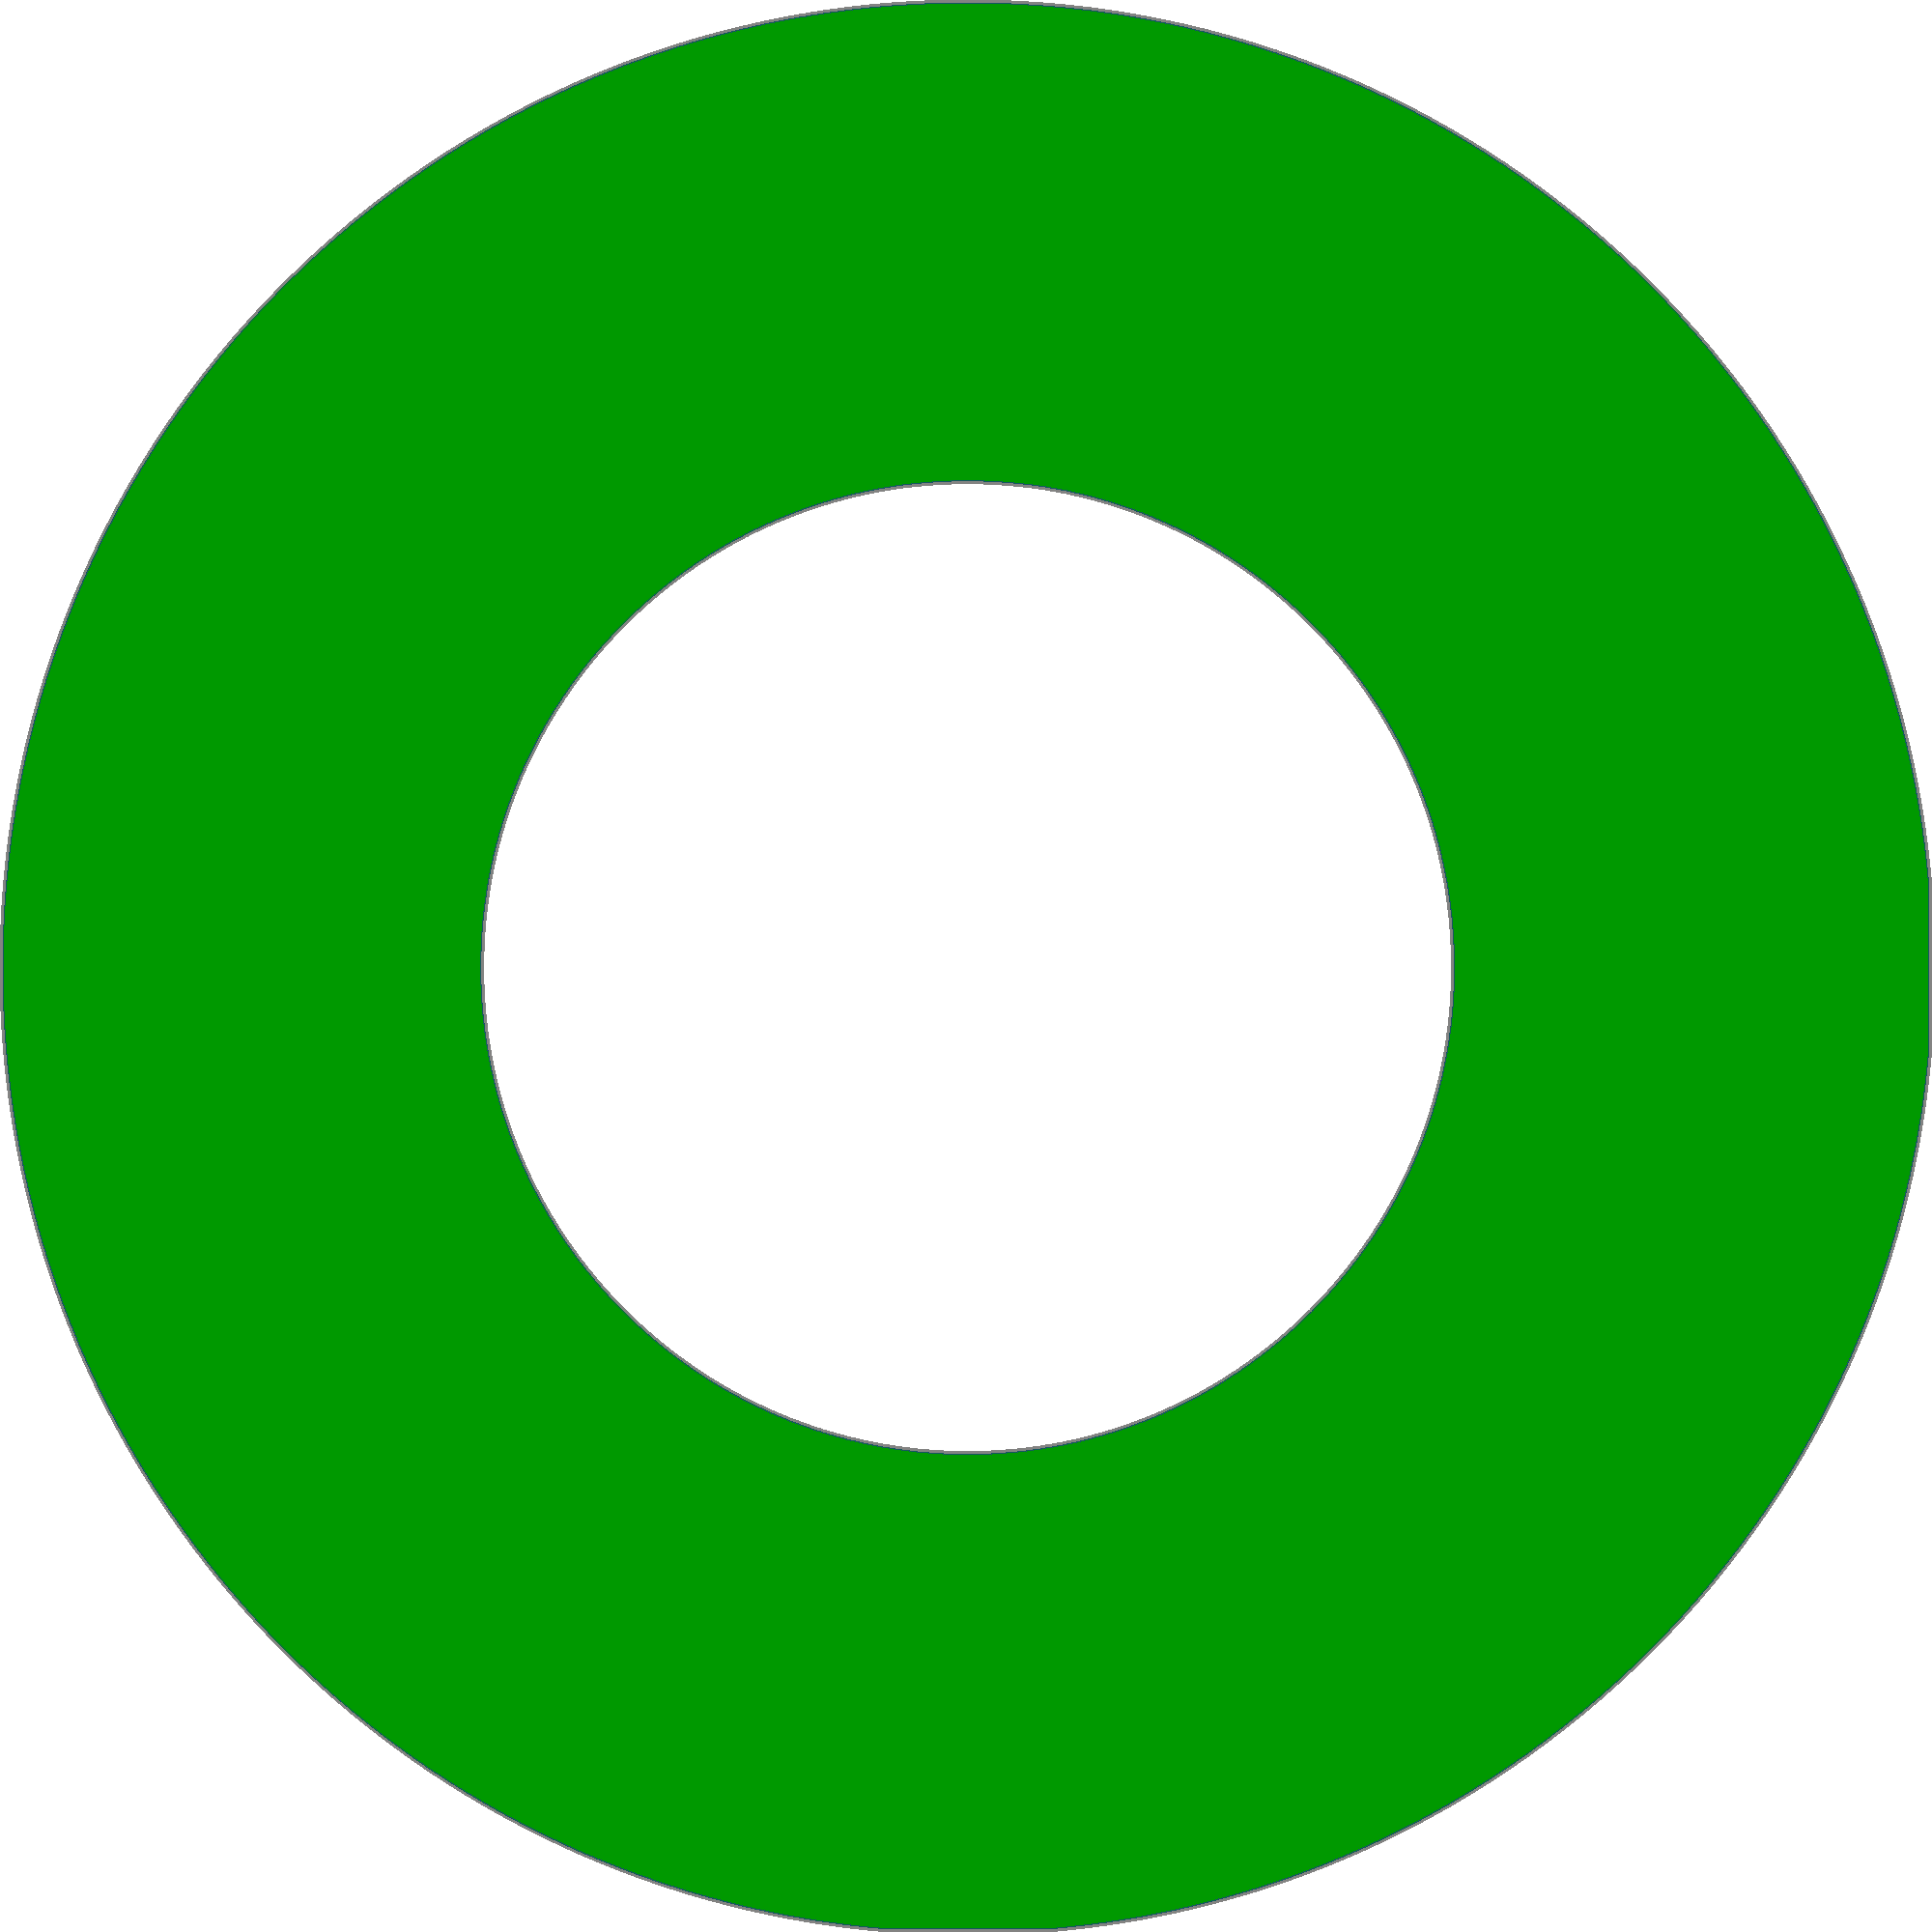 Green Circle Png Transparent Background Free Download 44857 Freeiconspng